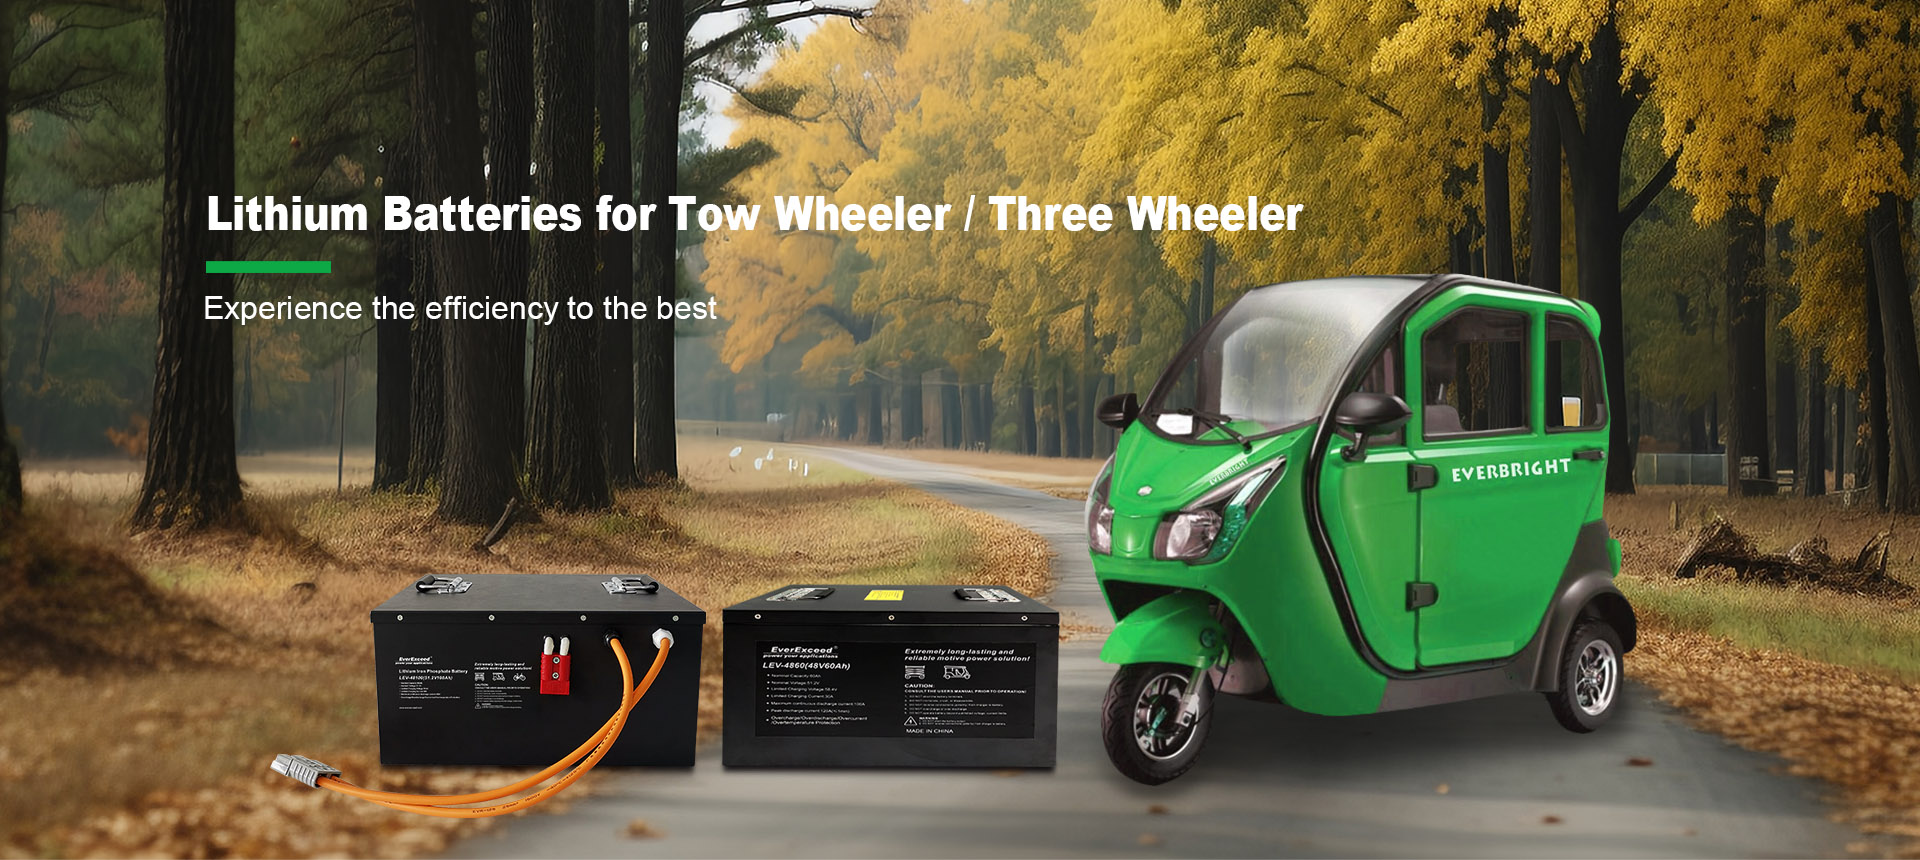 Electric Wheel Chair lithium battery